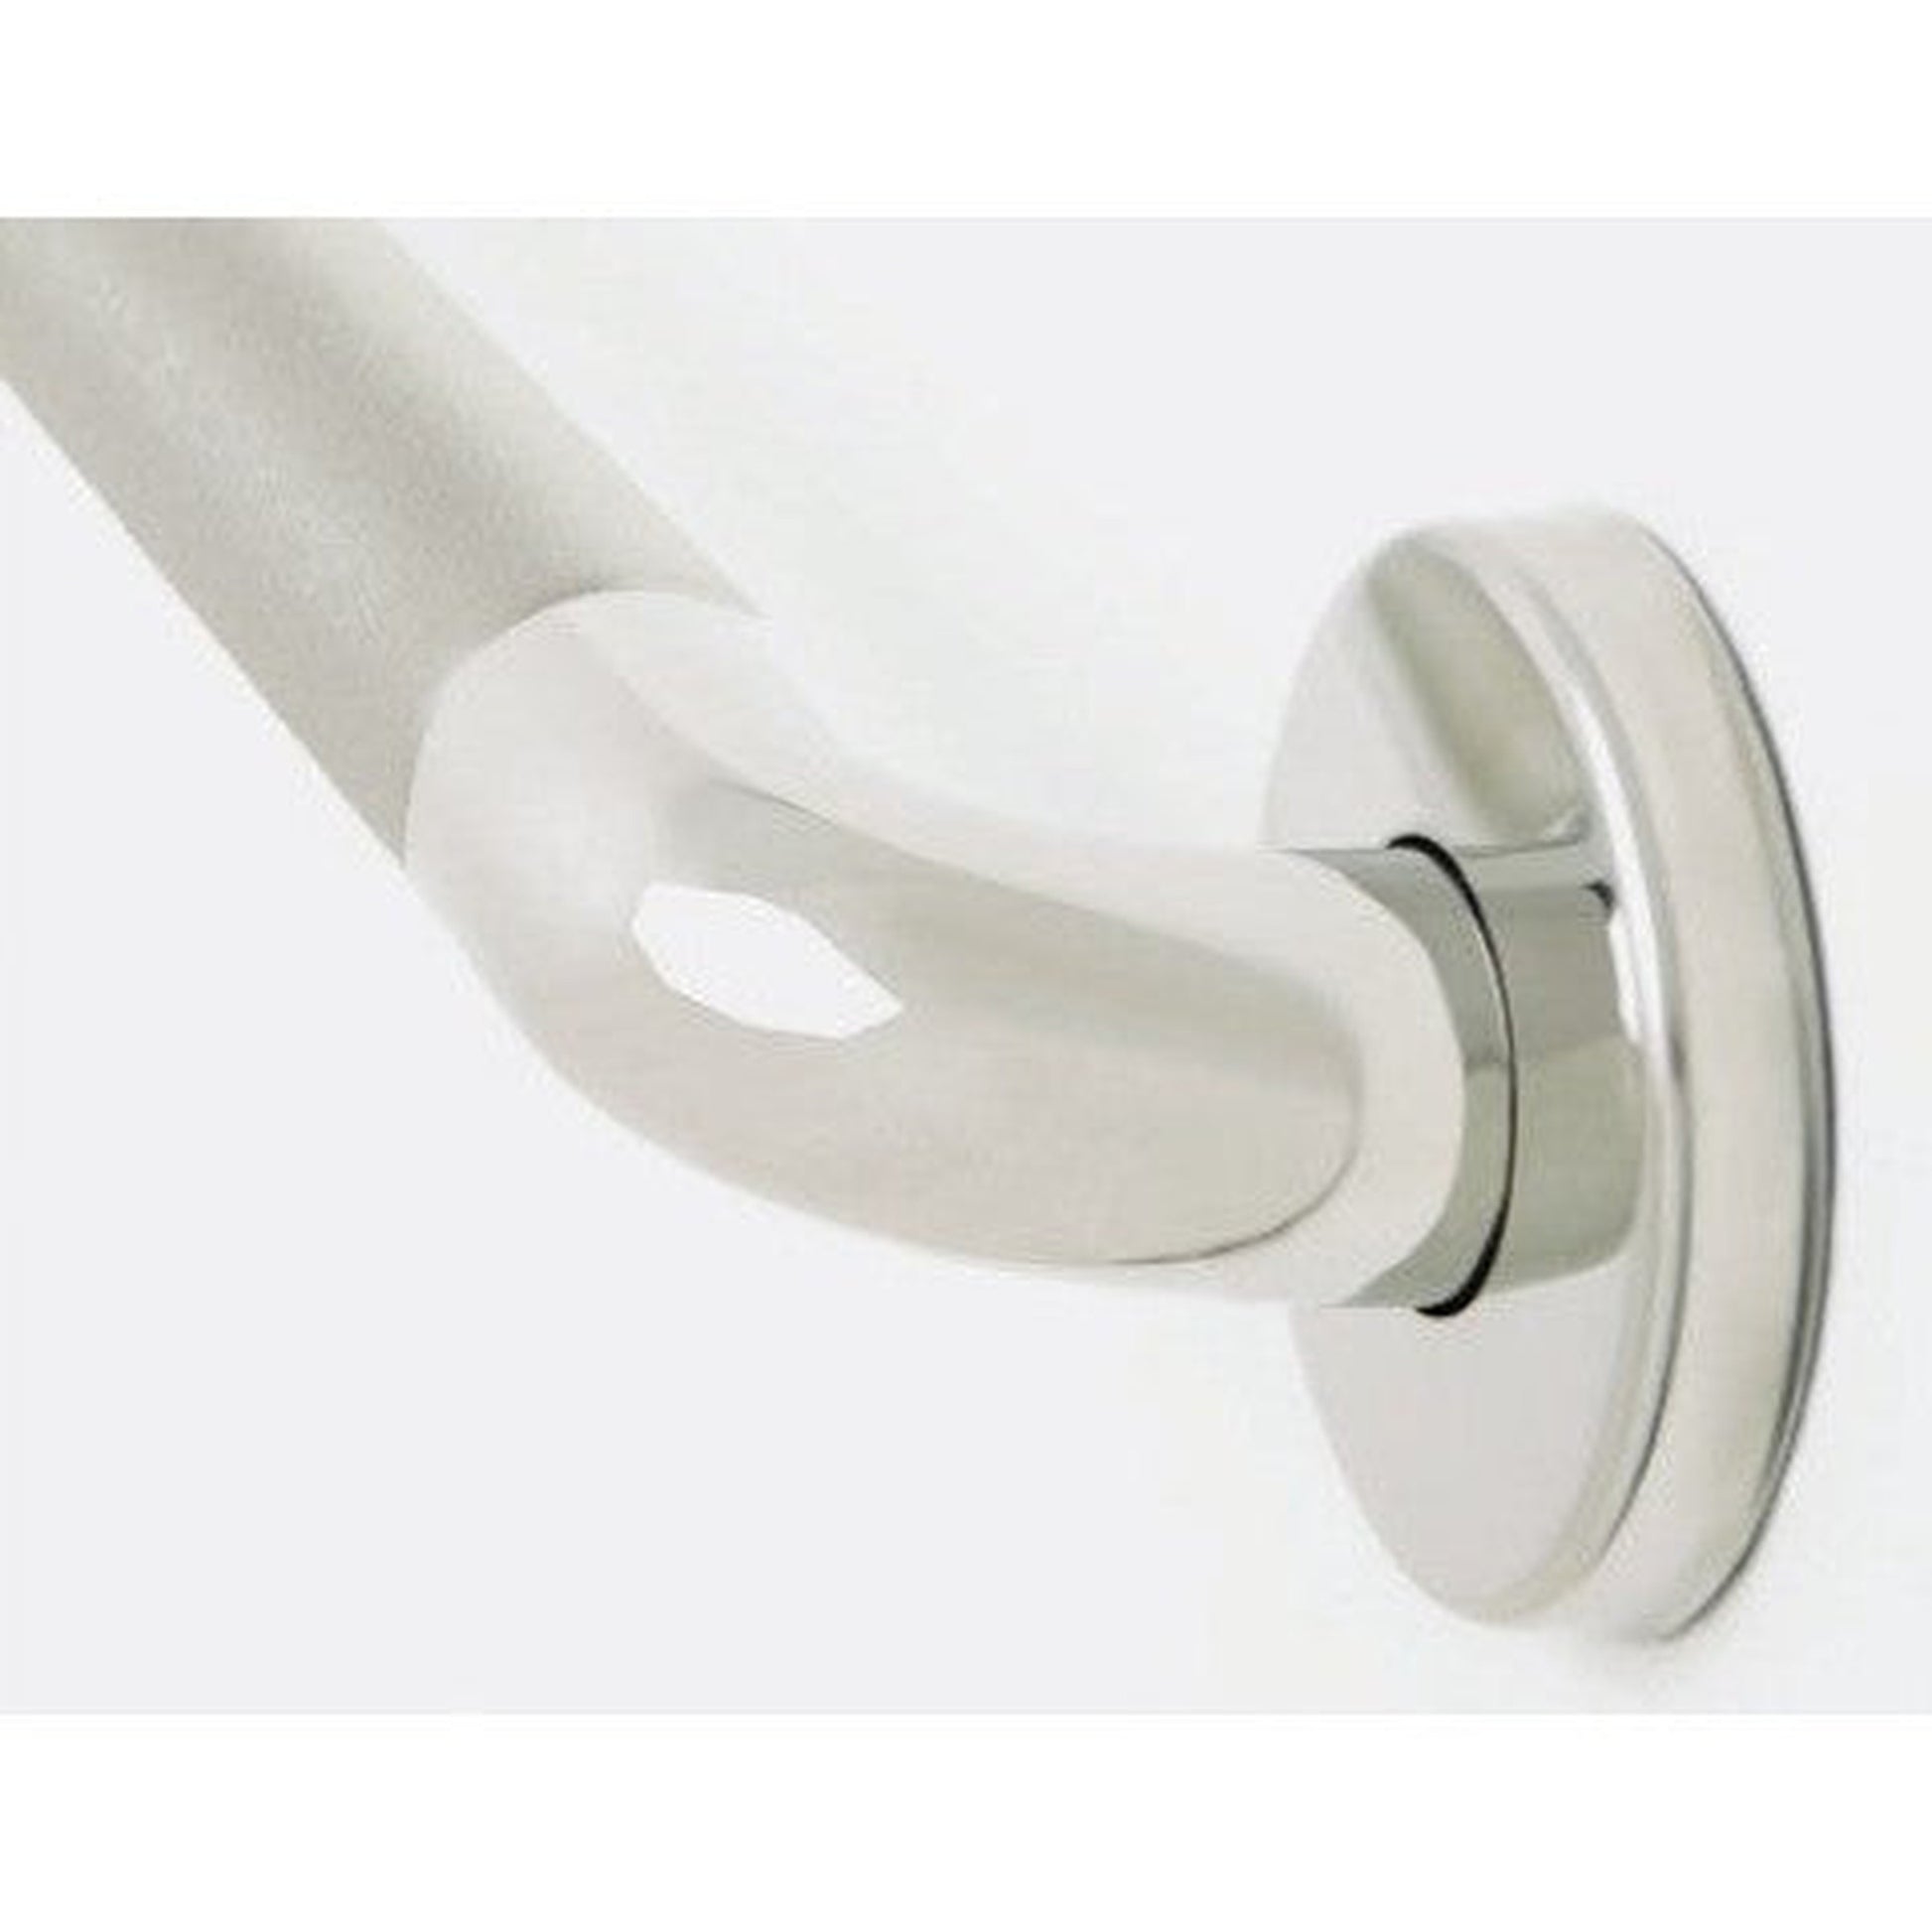 Seachrome Signature Series Value Line IGZS 16" Peened Stainless Steel With Polished Ends 1.25" Tube Diameter Concealed Flange Grab Bar